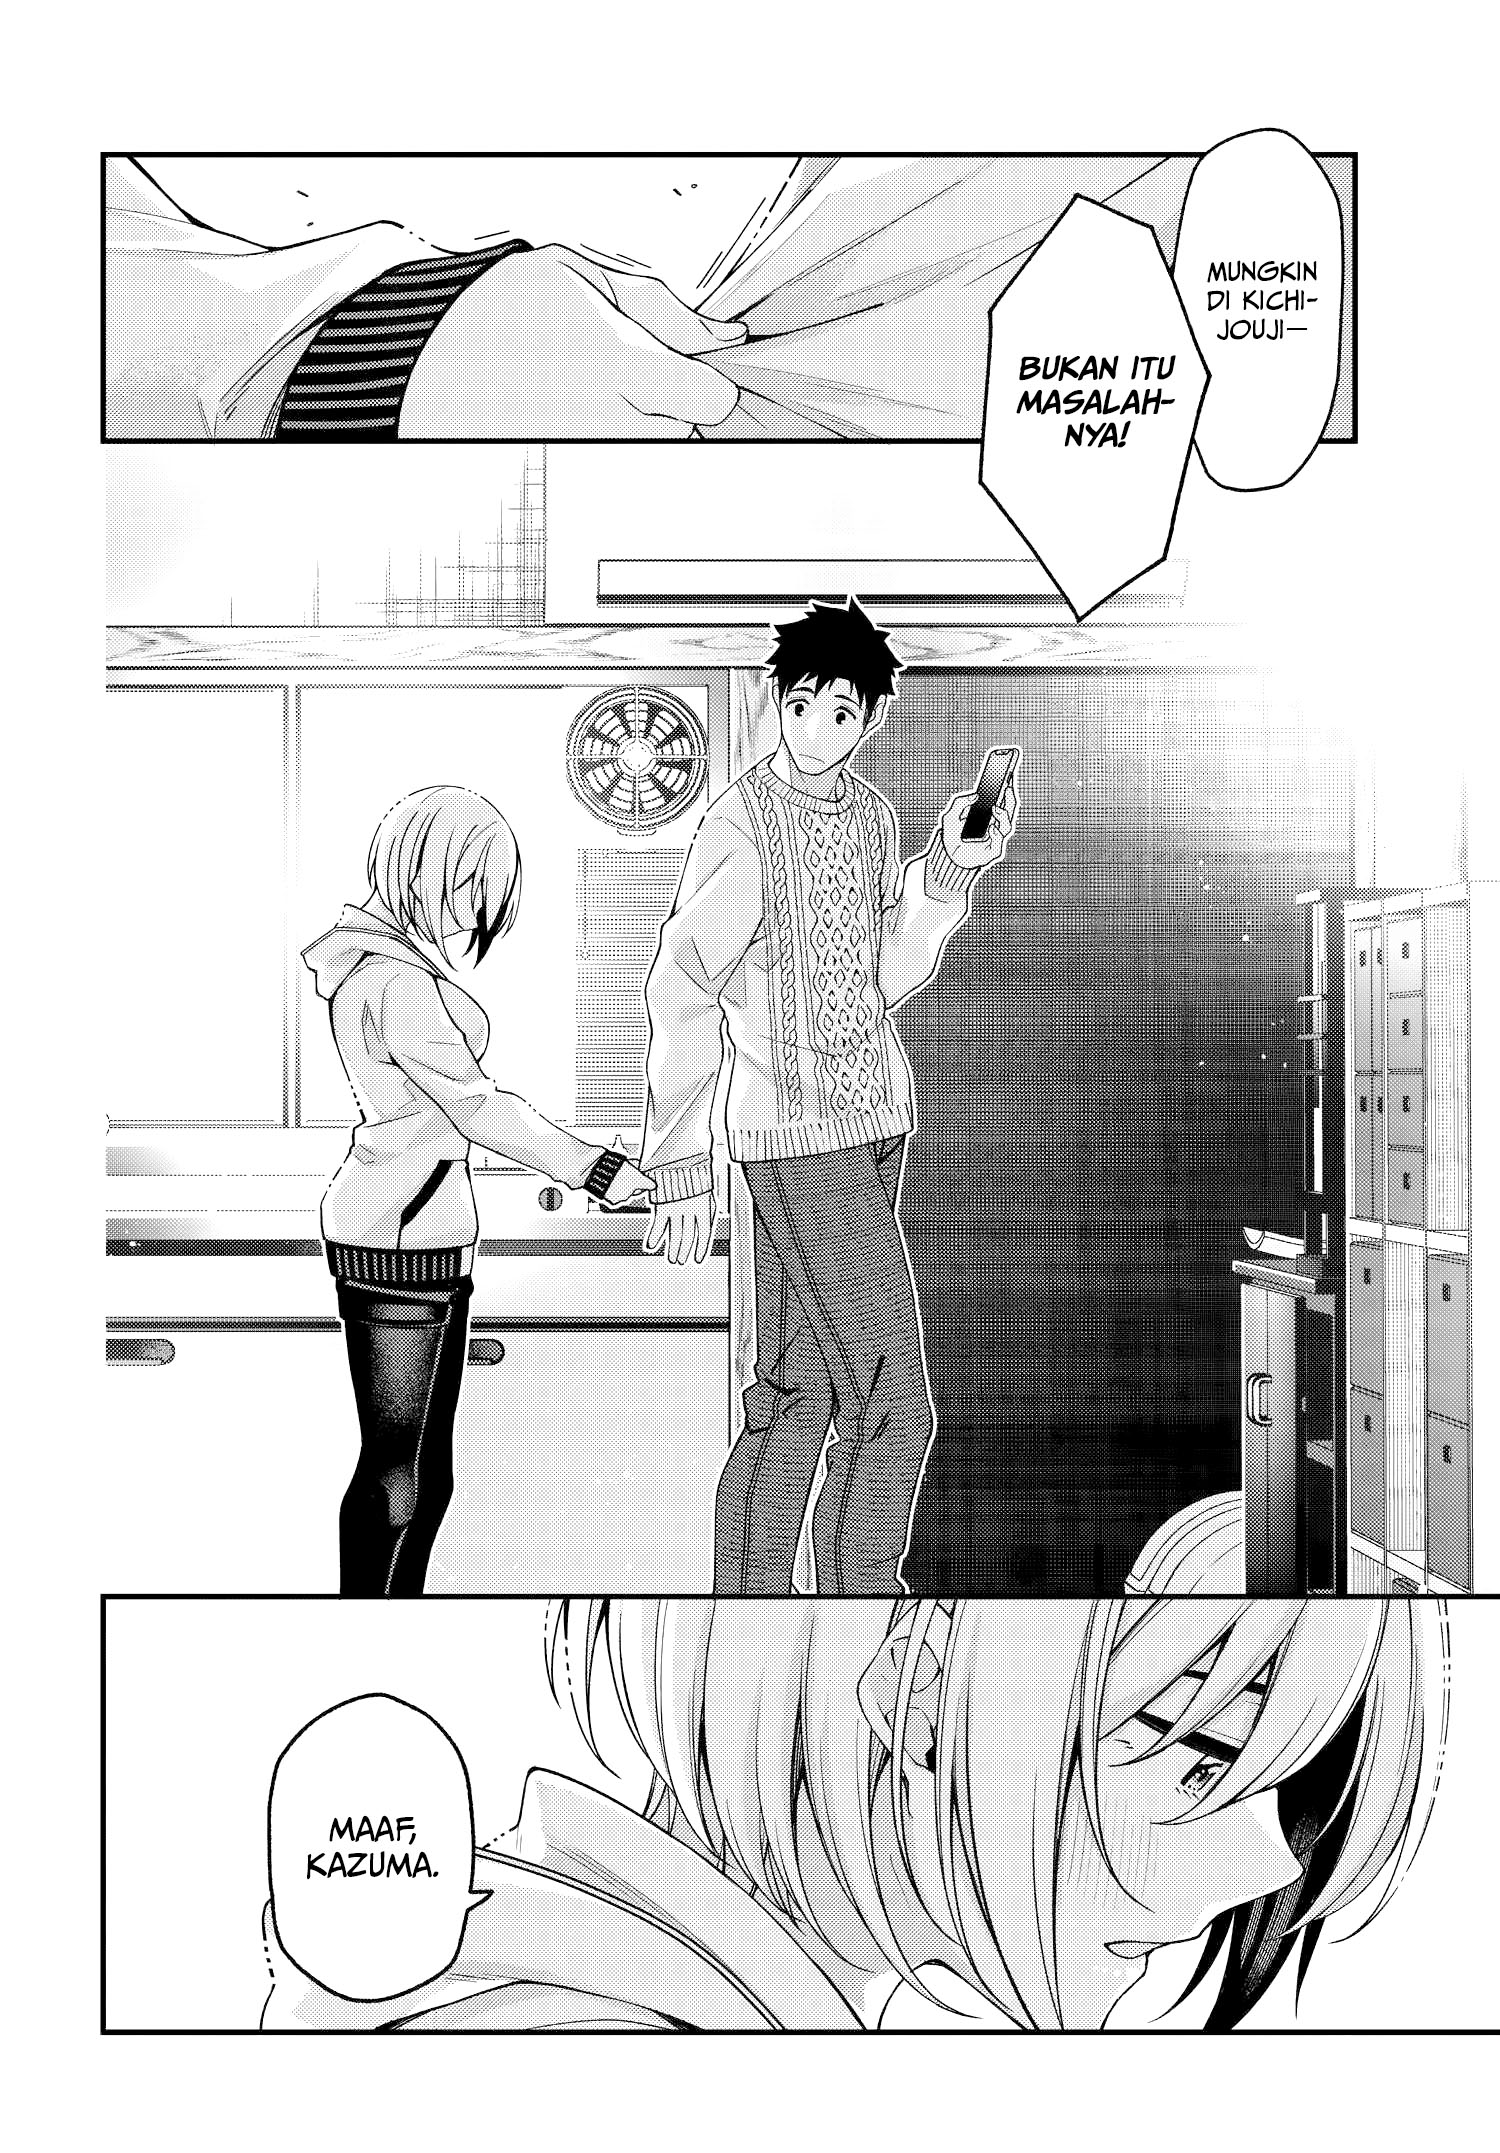 A Choice of Boyfriend and Girlfriend Chapter 02 23